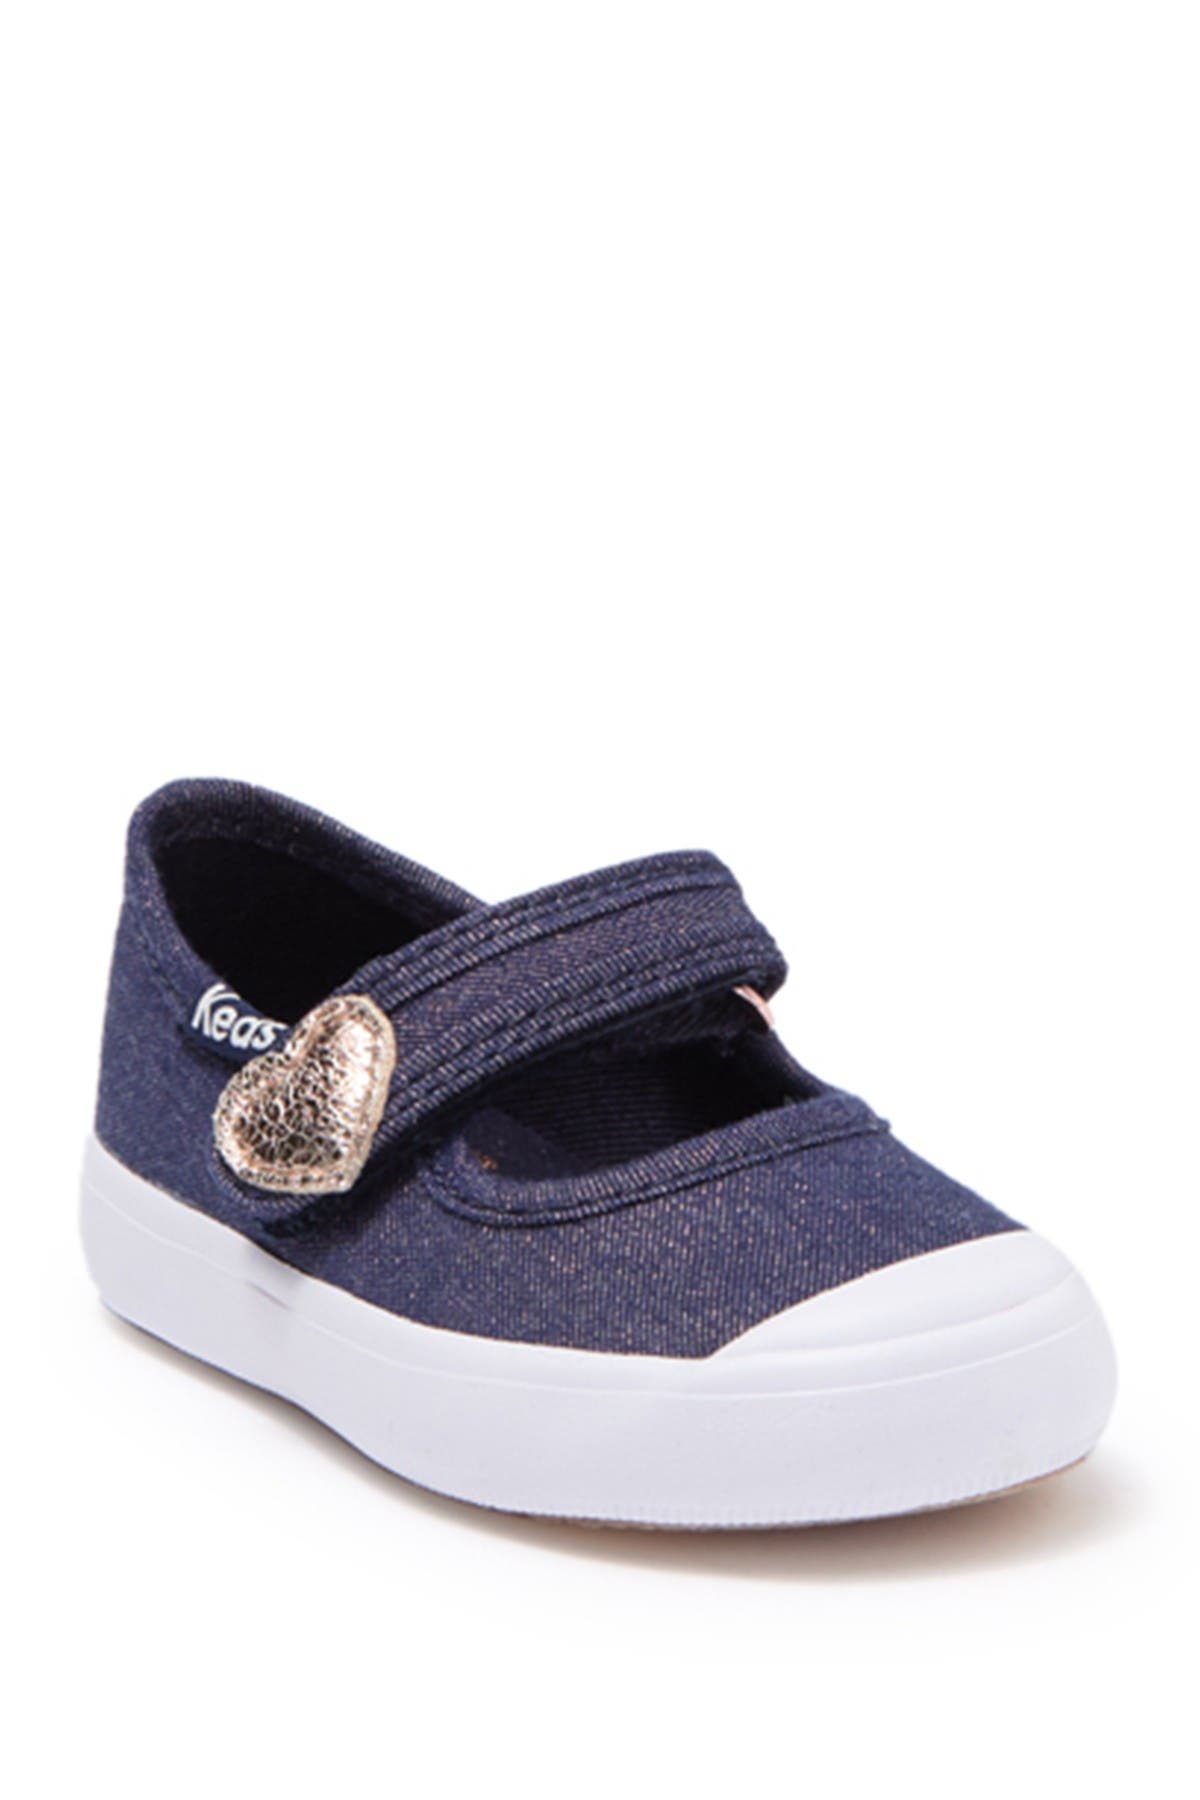 keds mary jane sneakers